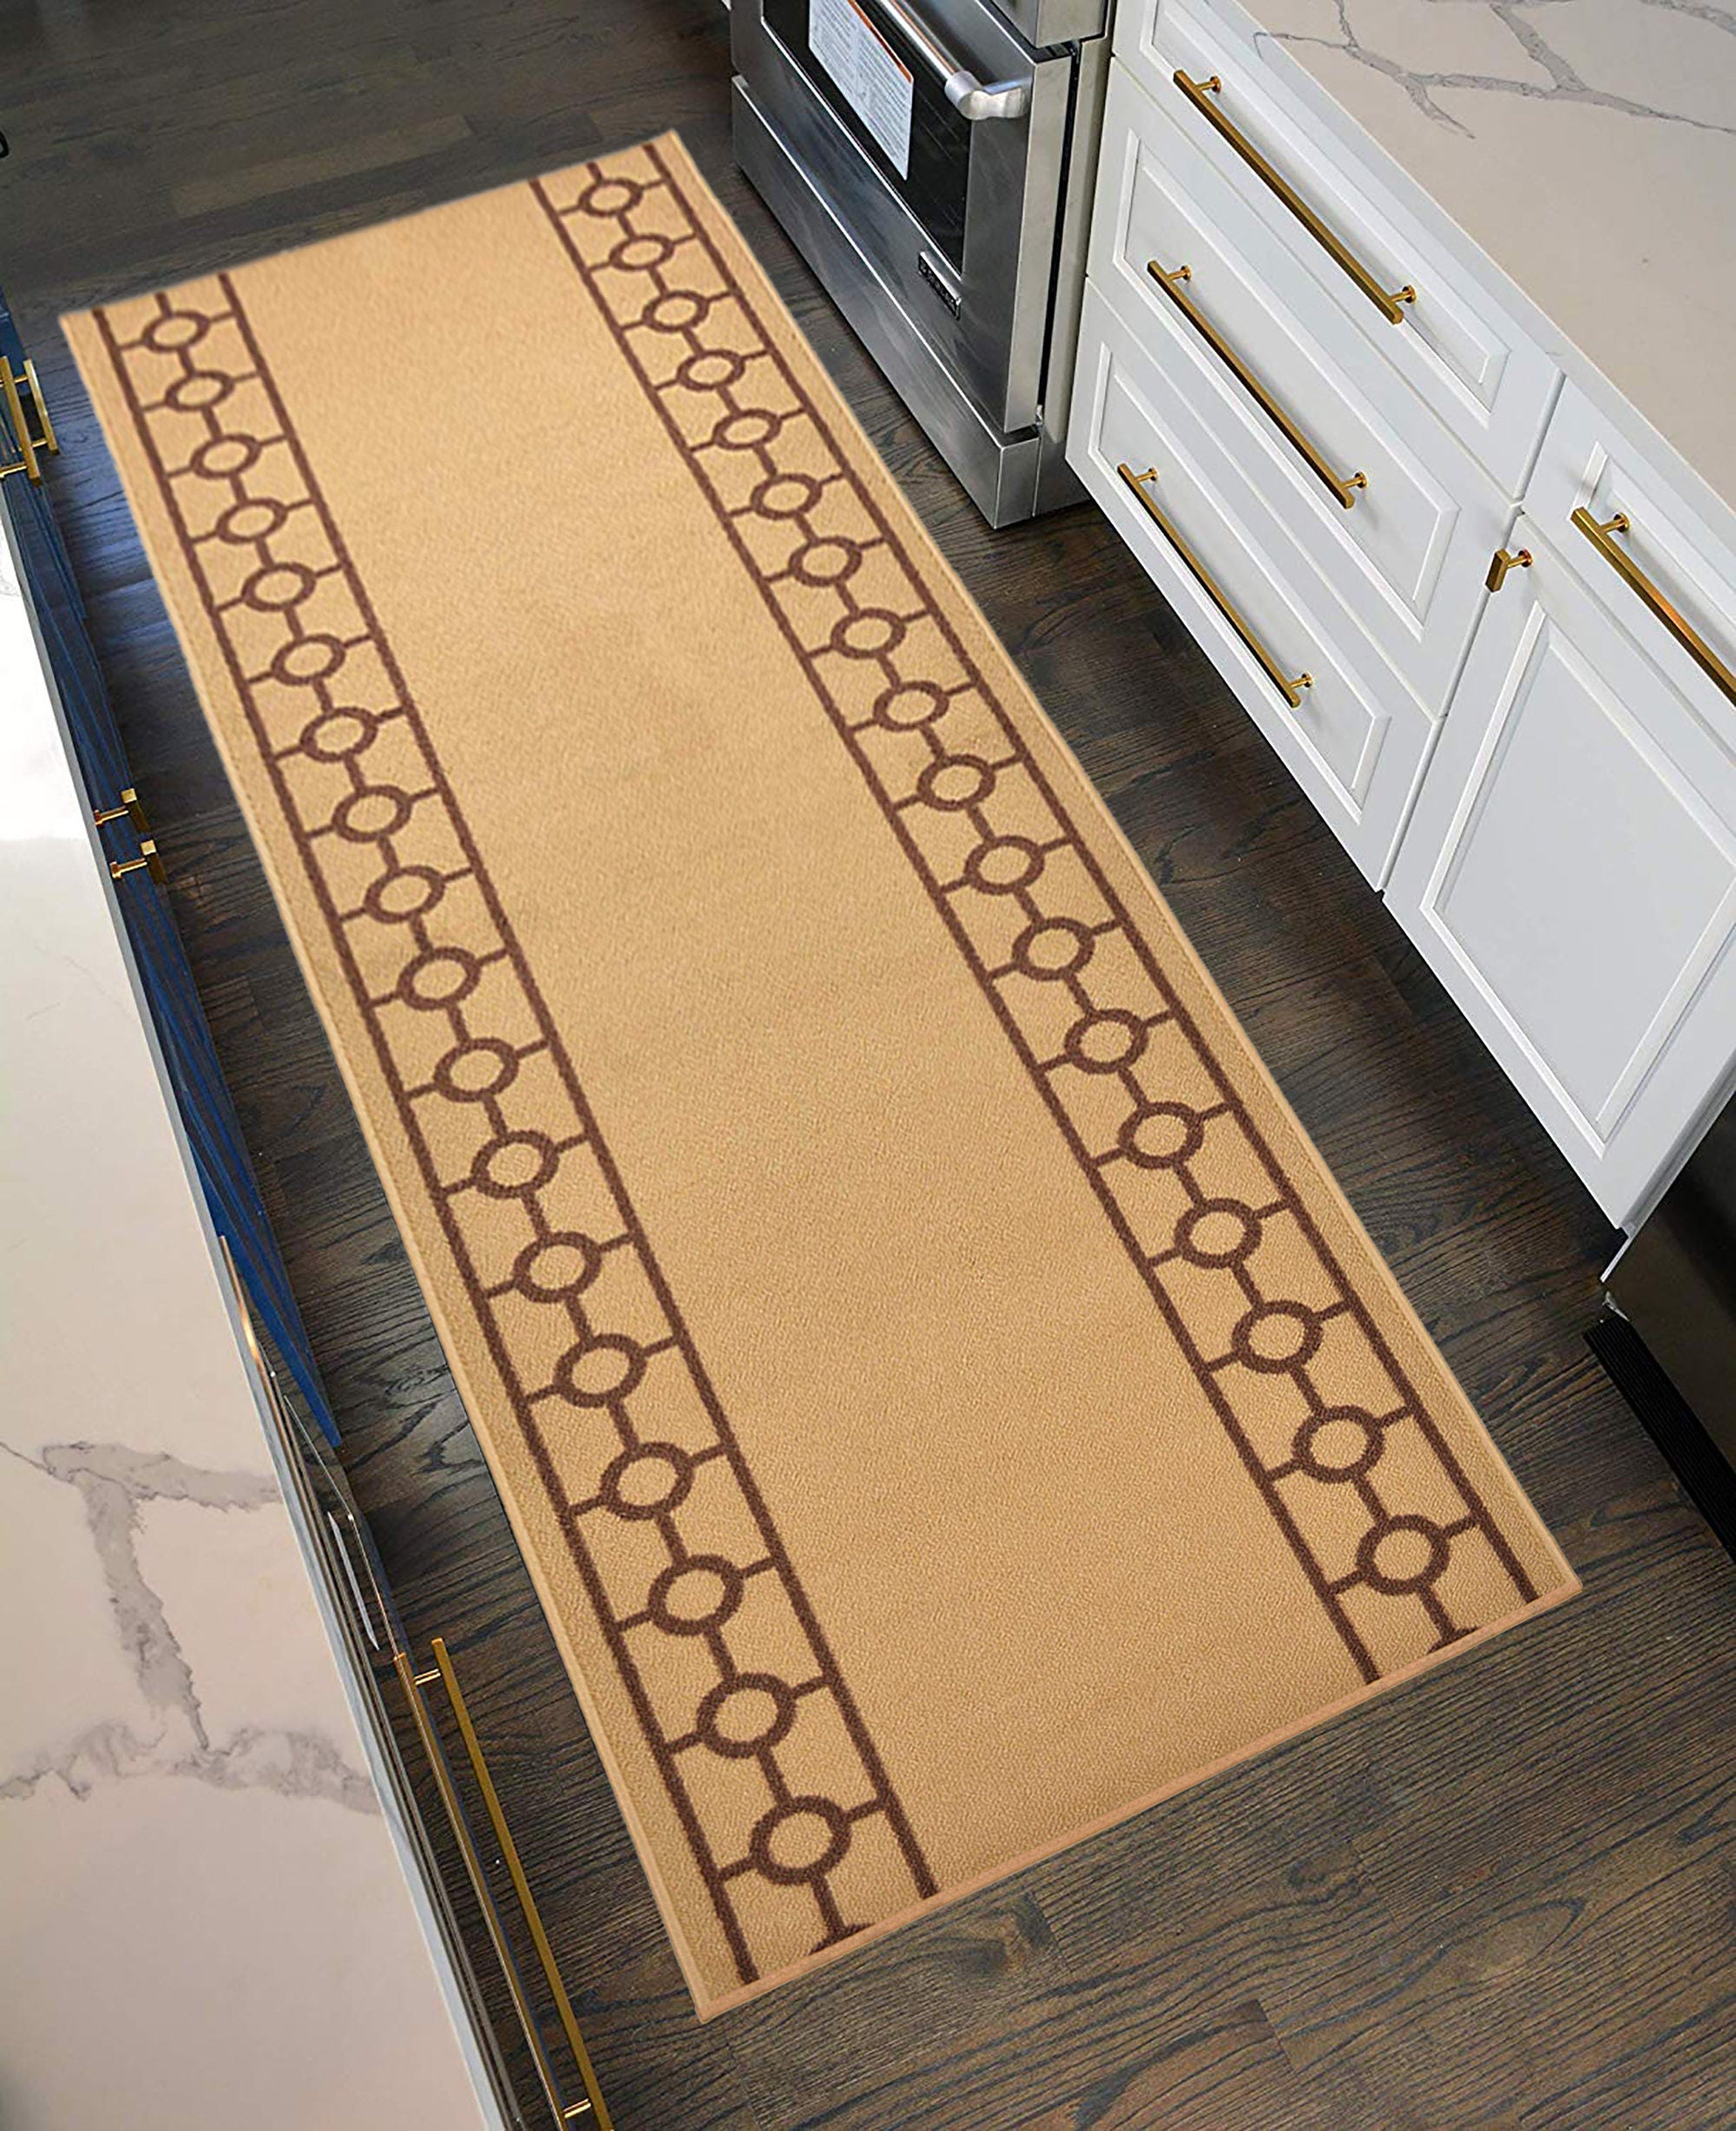 Custom Size Runner Rug Chain Border Beige with Brown Border Skid Resistant Runner Rug 26 Inches and 32 Inches Wide Customize By Feet